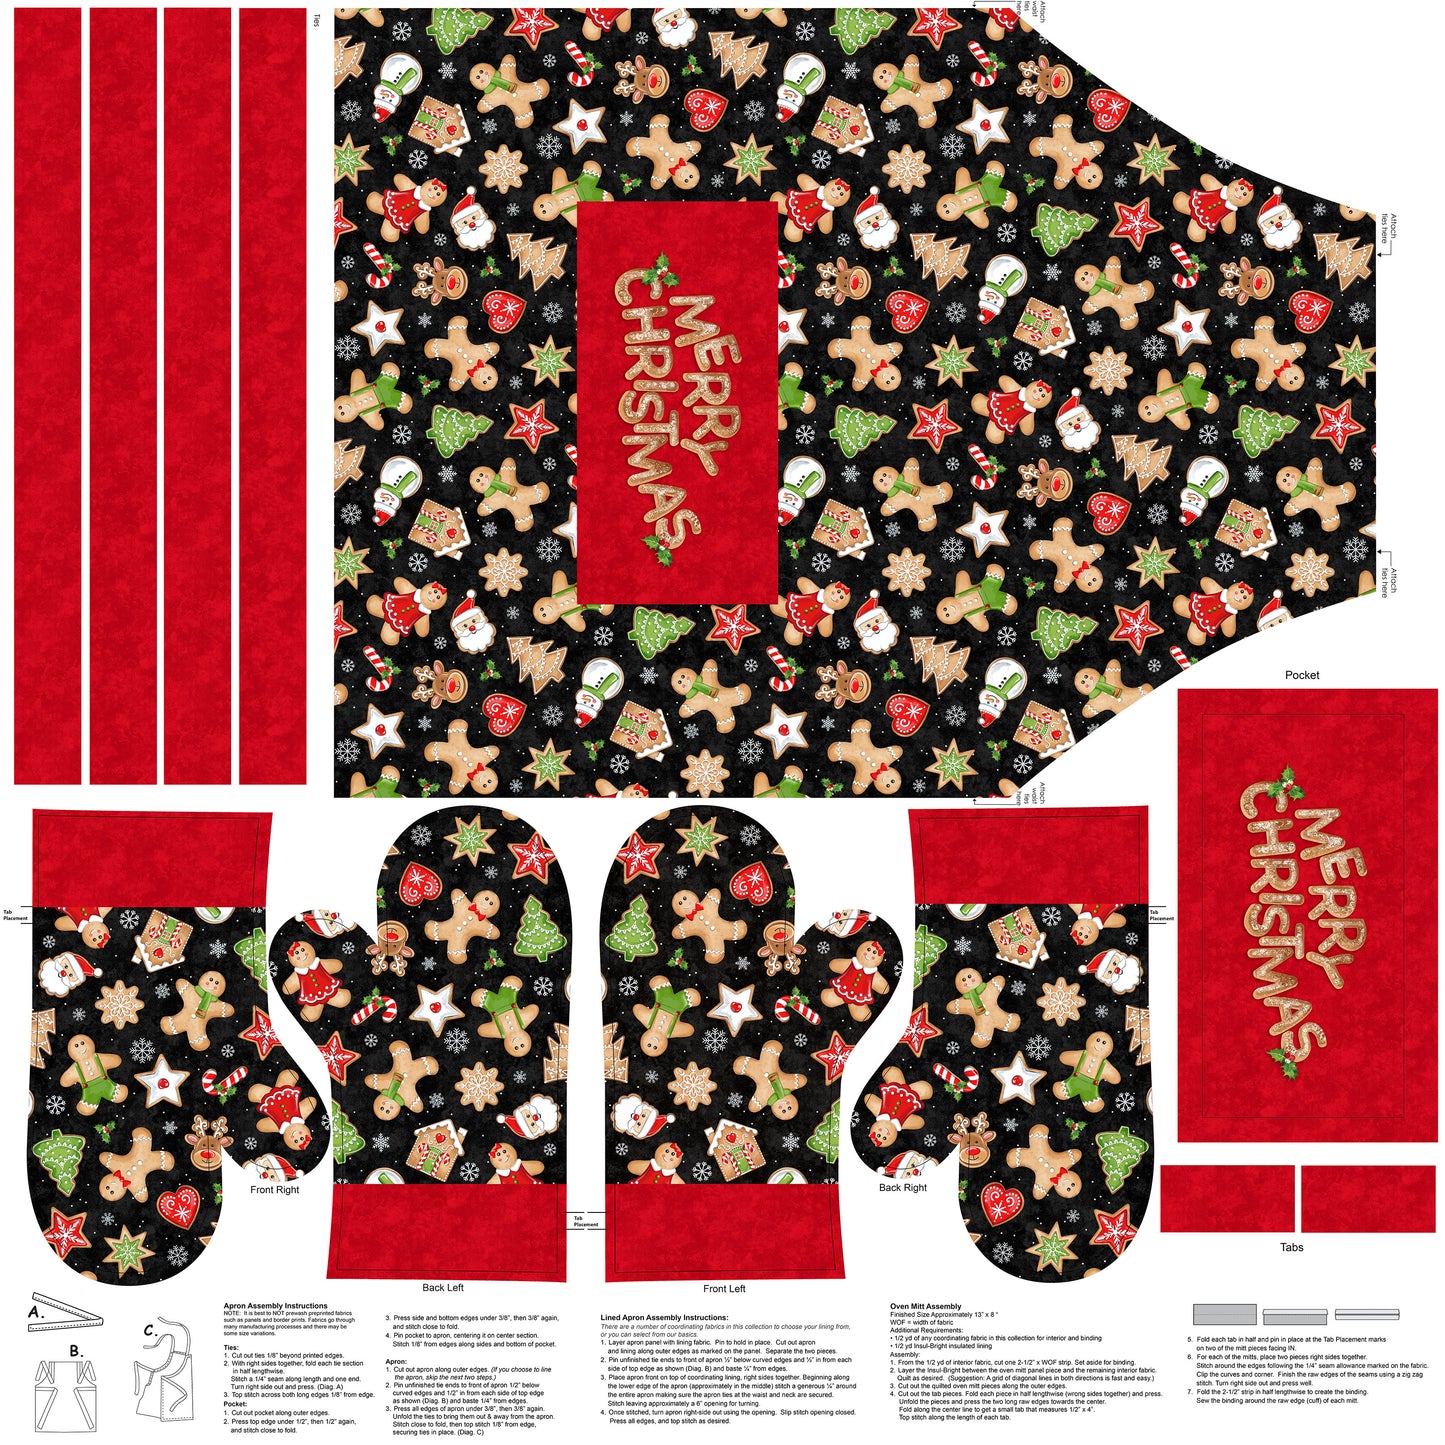 New Arrival: Sugar Coated Digital by Deborah Edwards 43" Panel Adult's Apron  Red  DP27137-24 Cotton Woven Panel